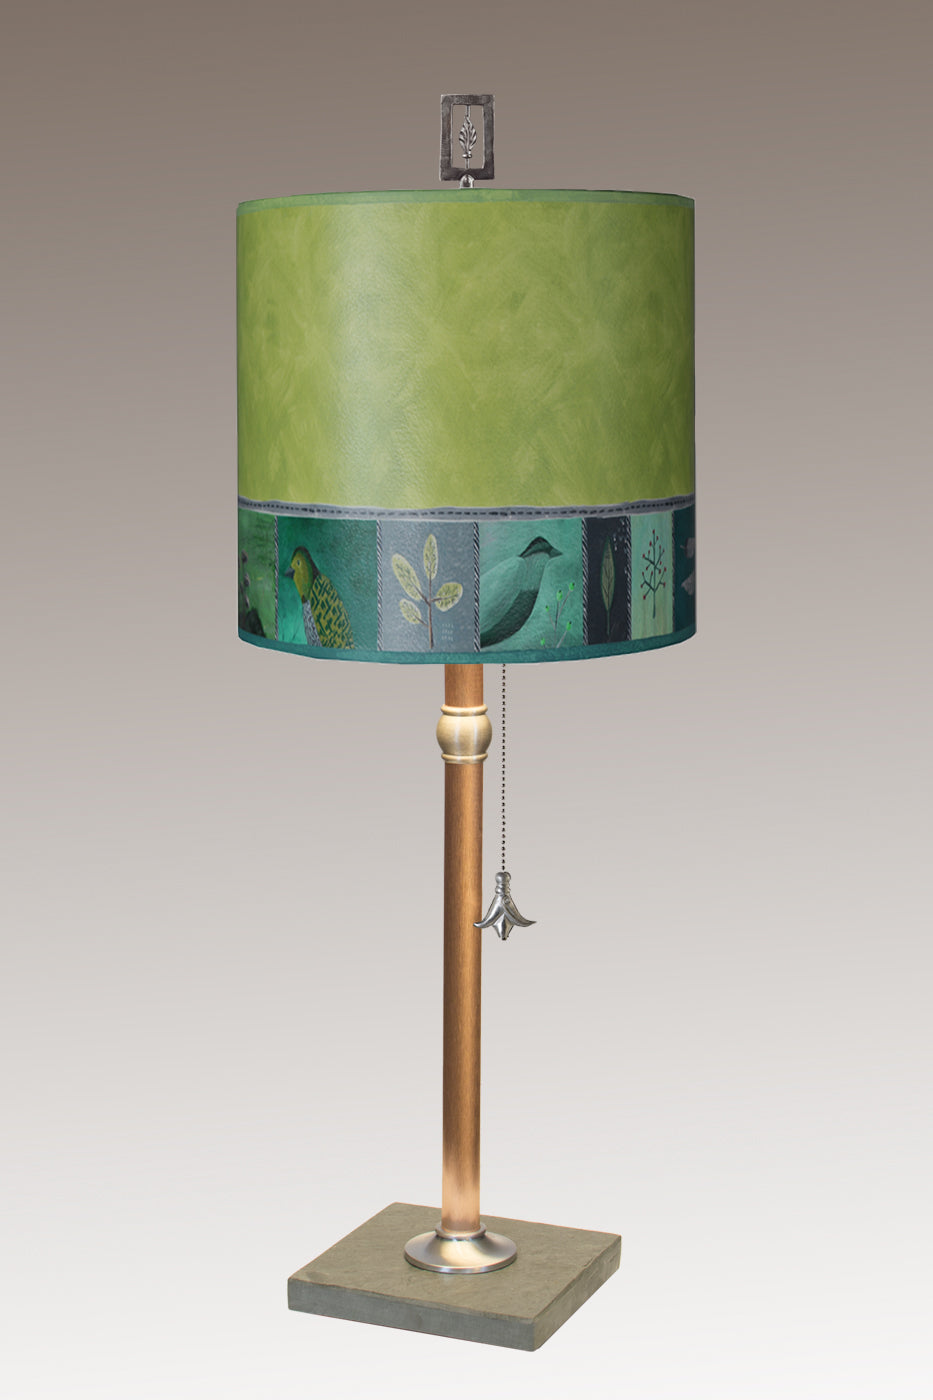 Janna Ugone & Co Table Lamps Copper Table Lamp with Medium Drum Shade in Woodland Trails in Leaf